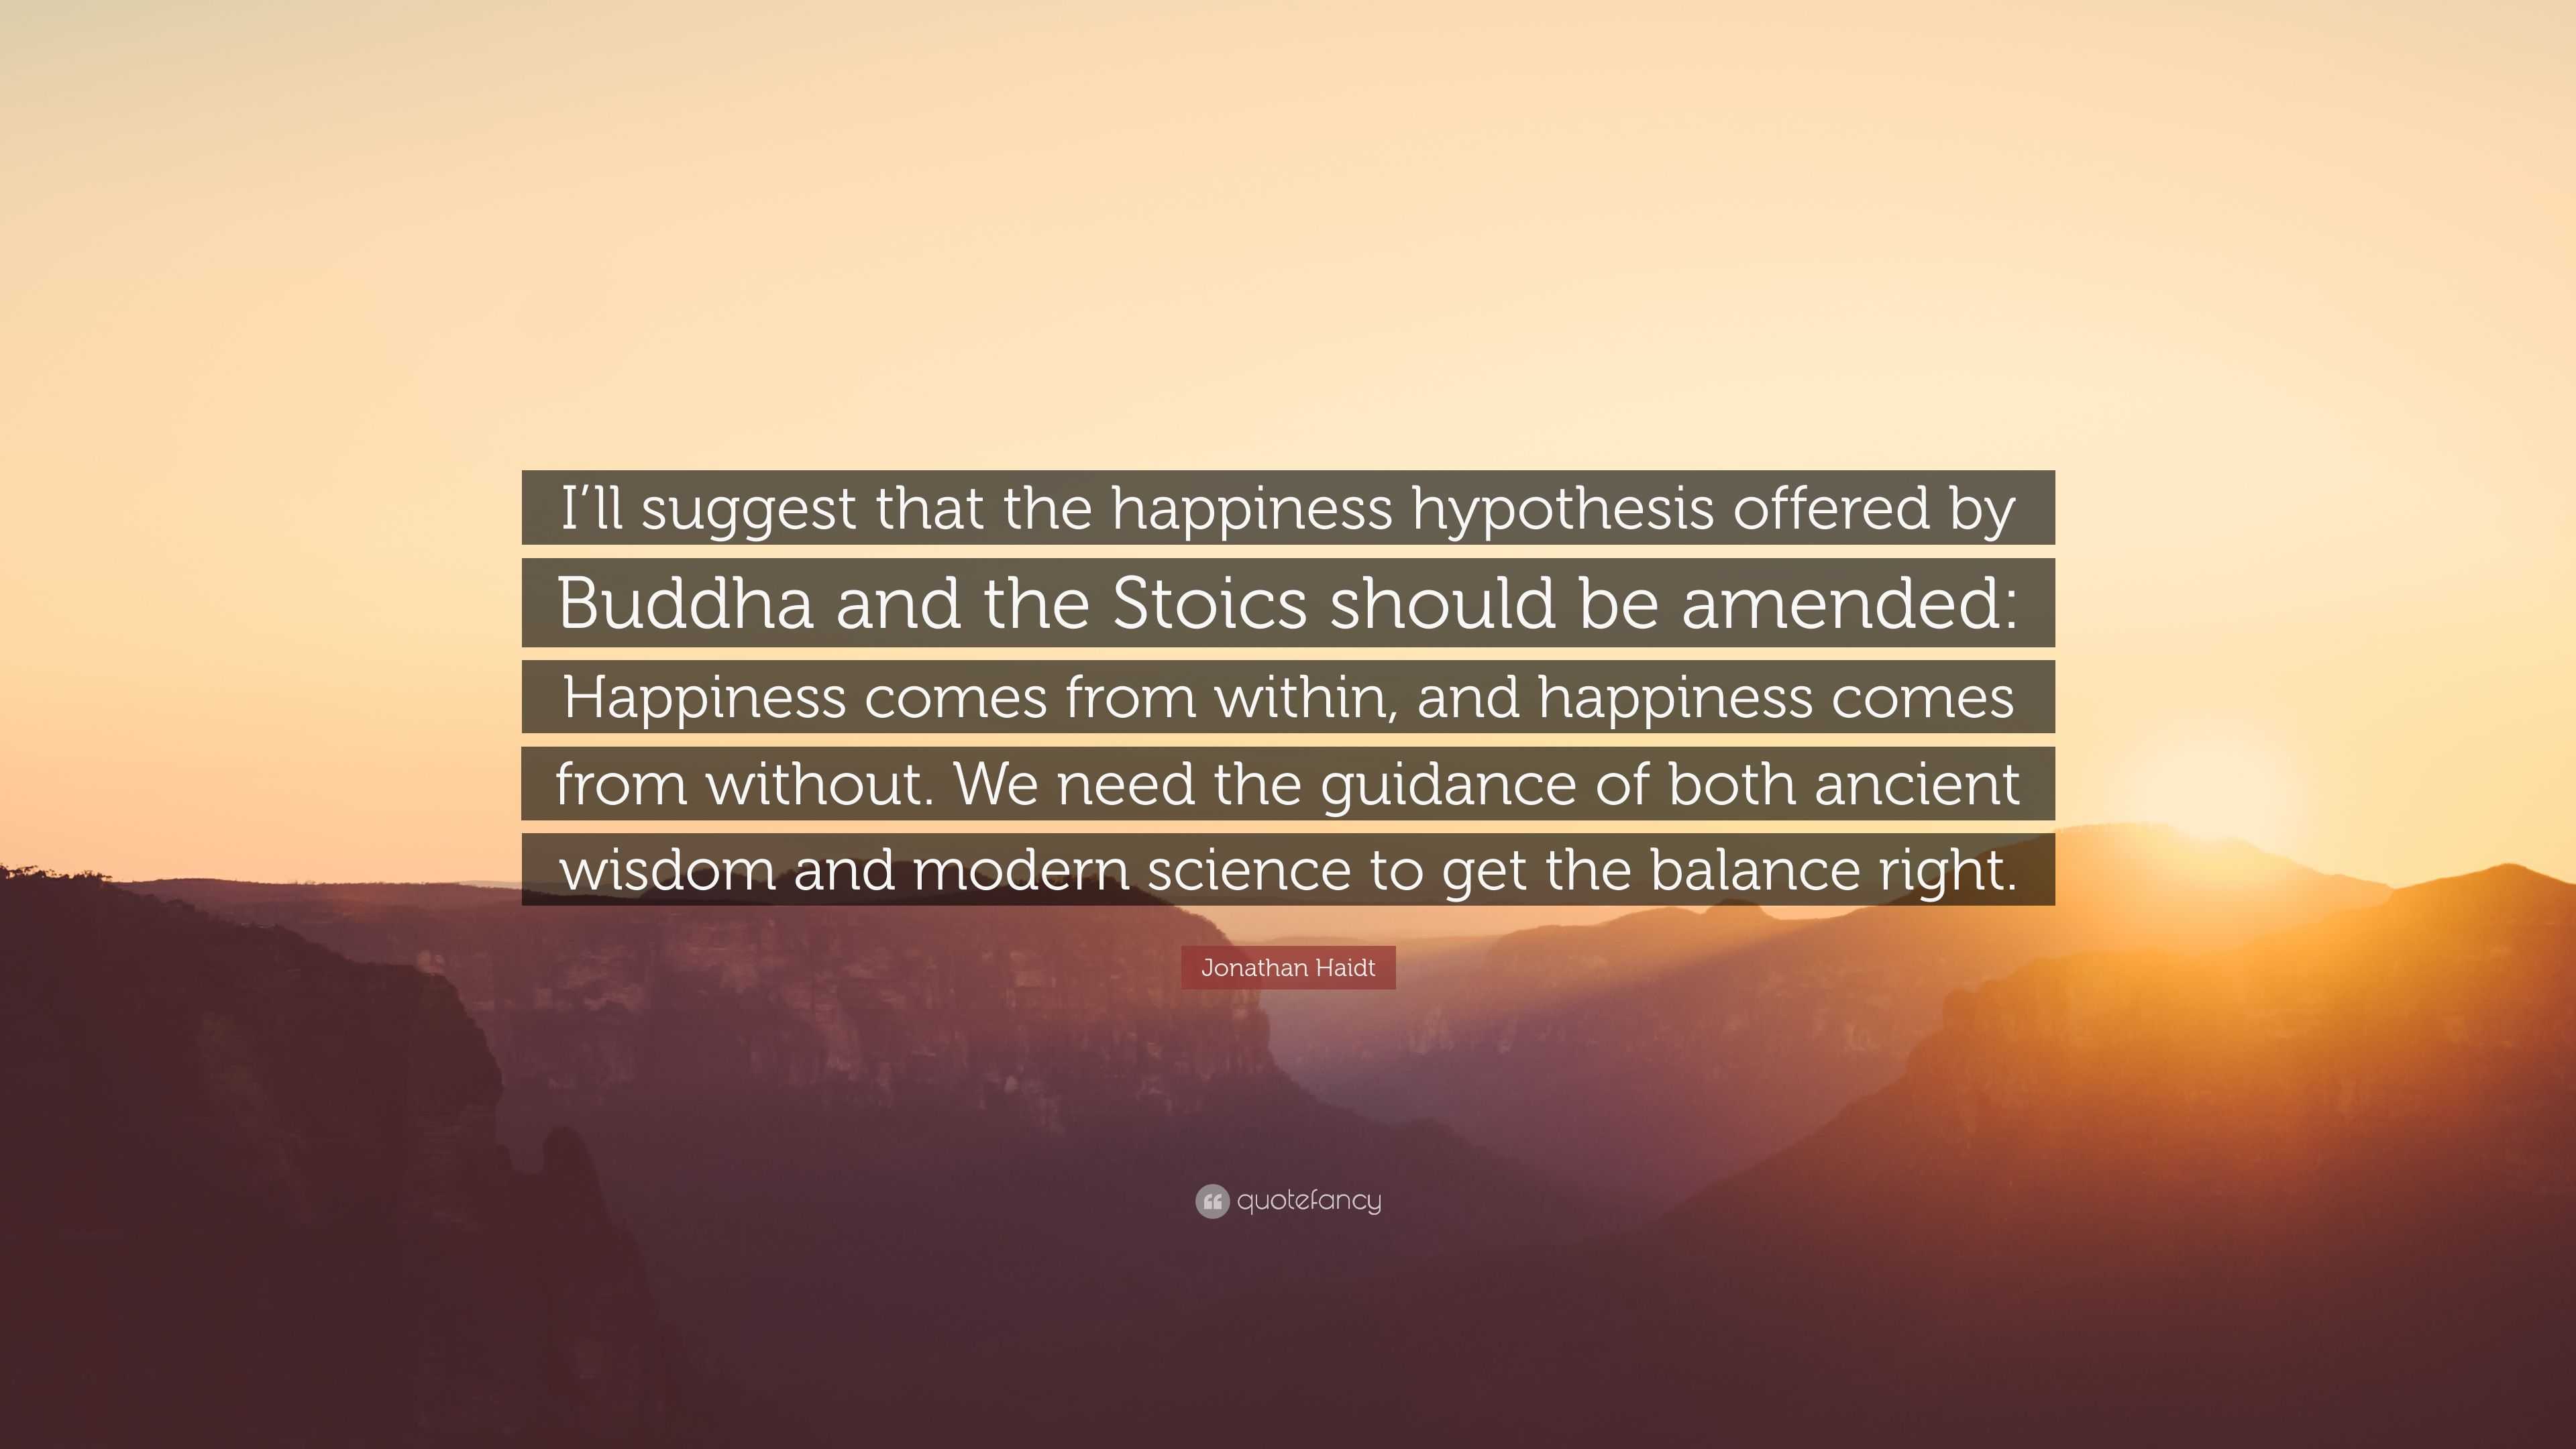 Jonathan Haidt Quote: “I’ll suggest that the happiness hypothesis